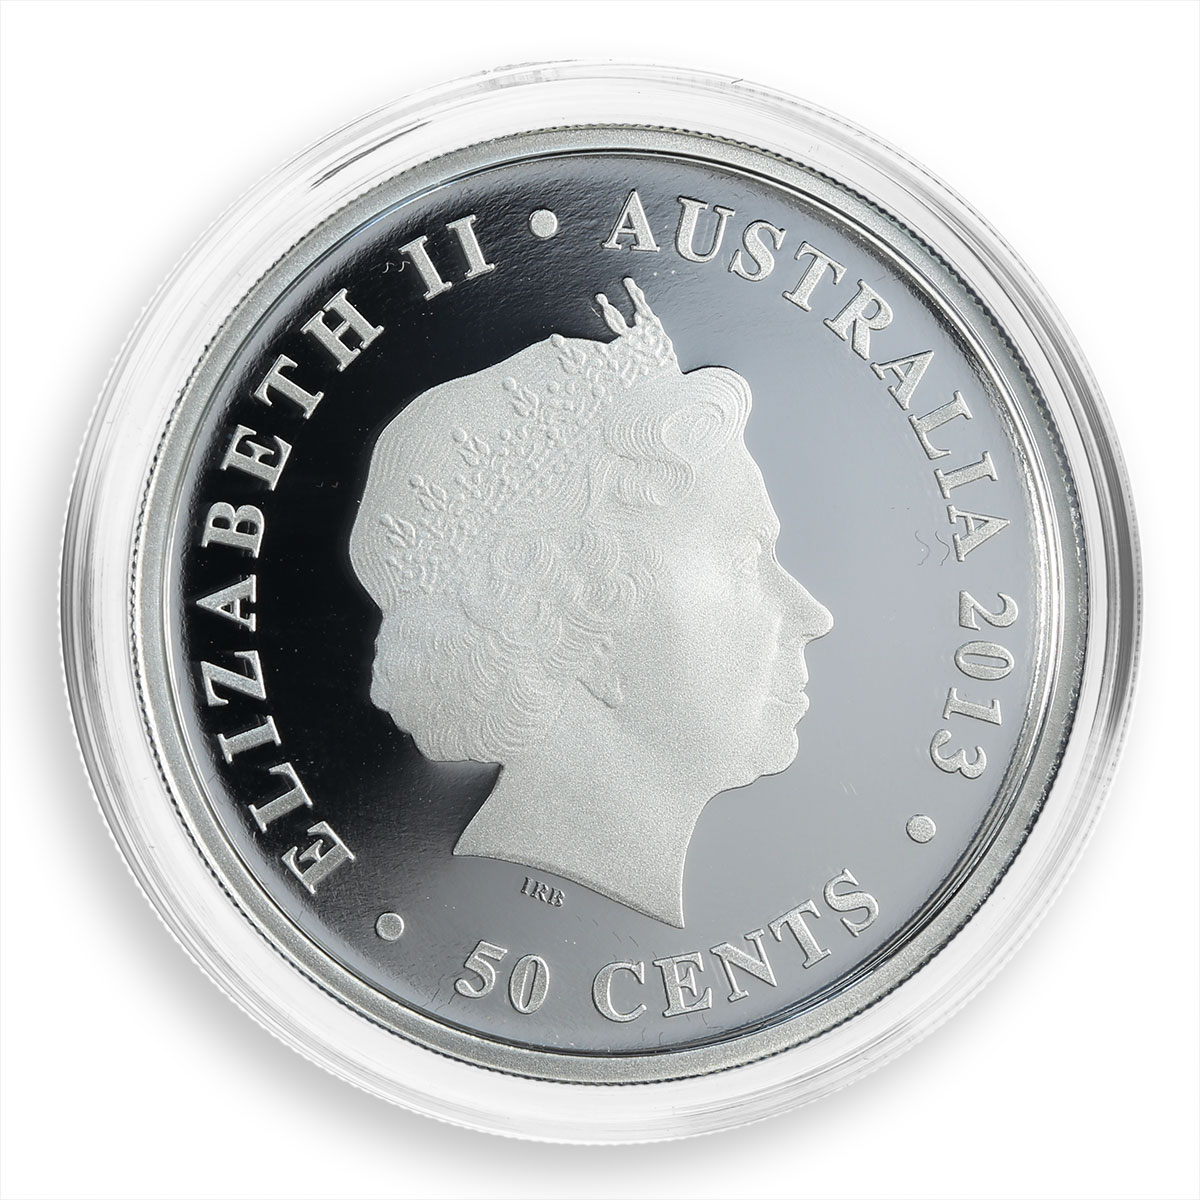 Australia 50 cents Marry New Year Tree silver coloured proof coin 2013